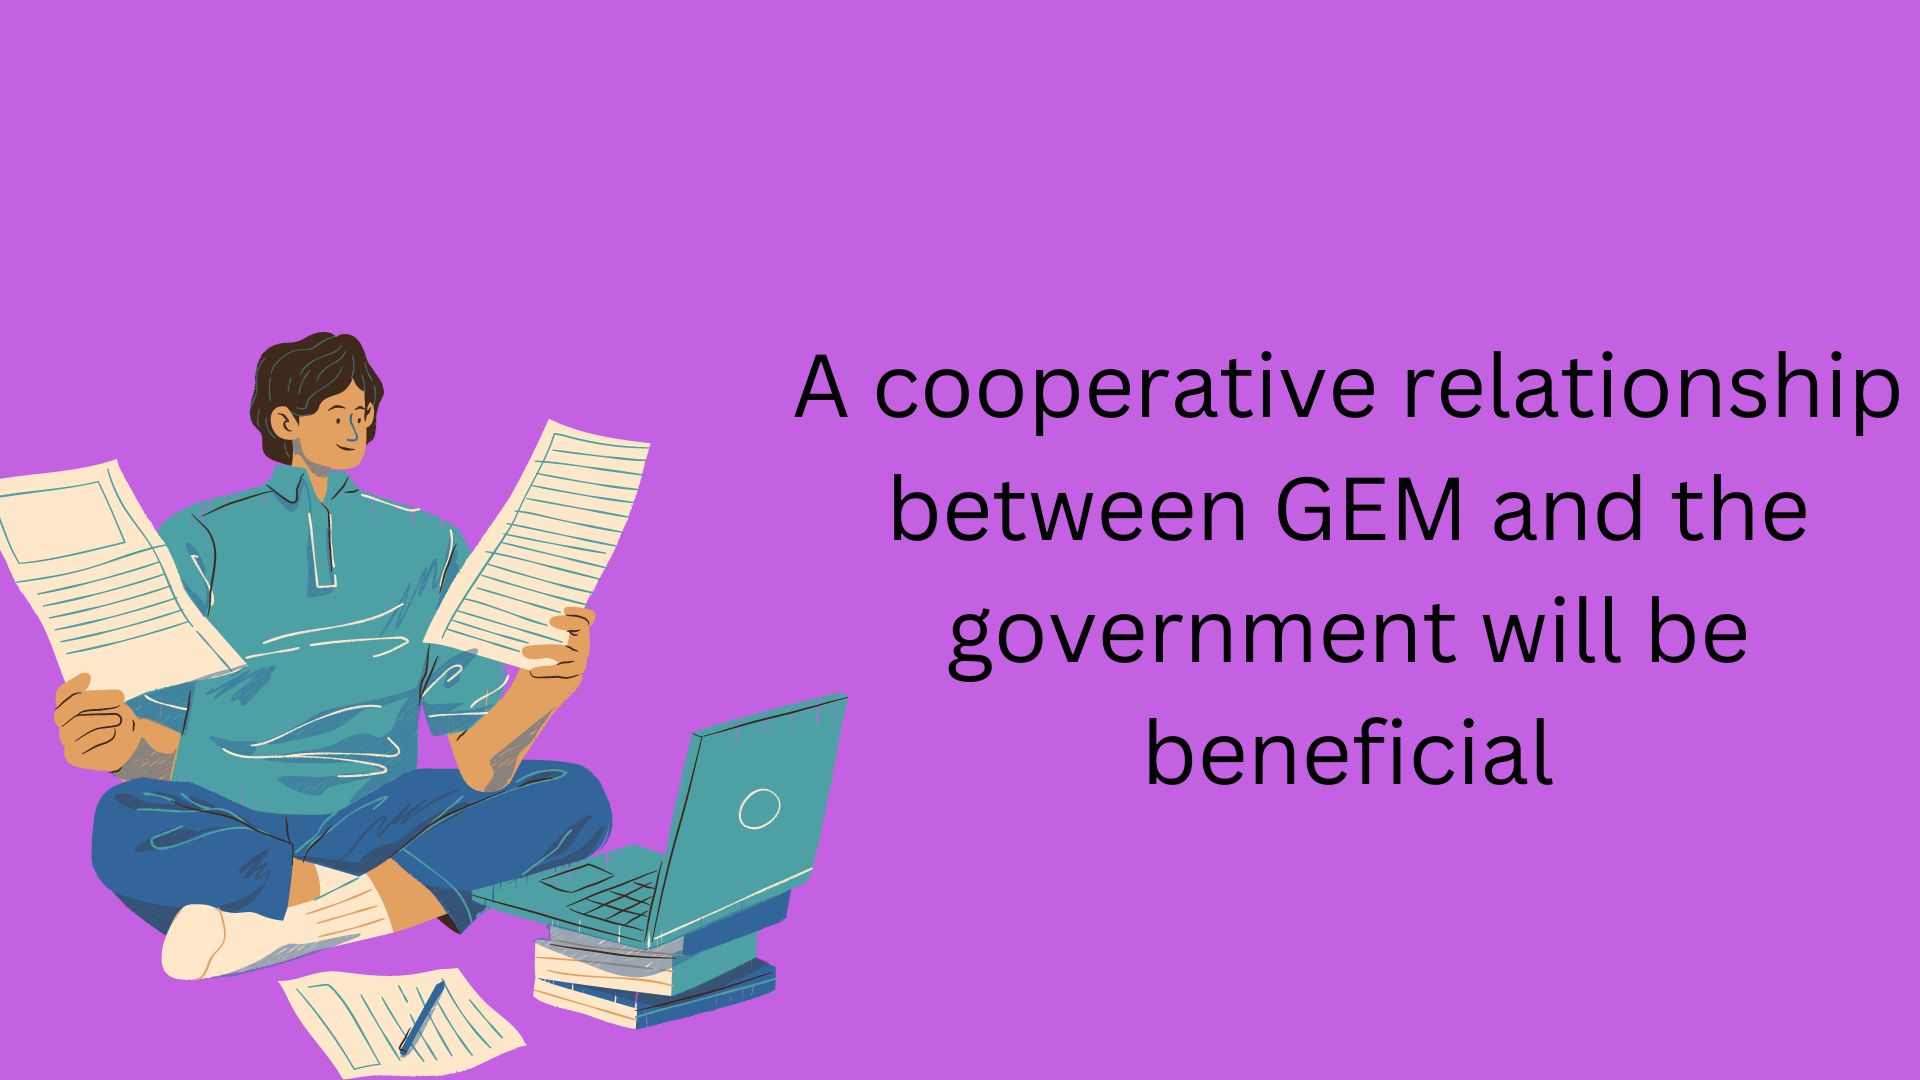 A cooperative relationship between GEM and the government will be beneficial